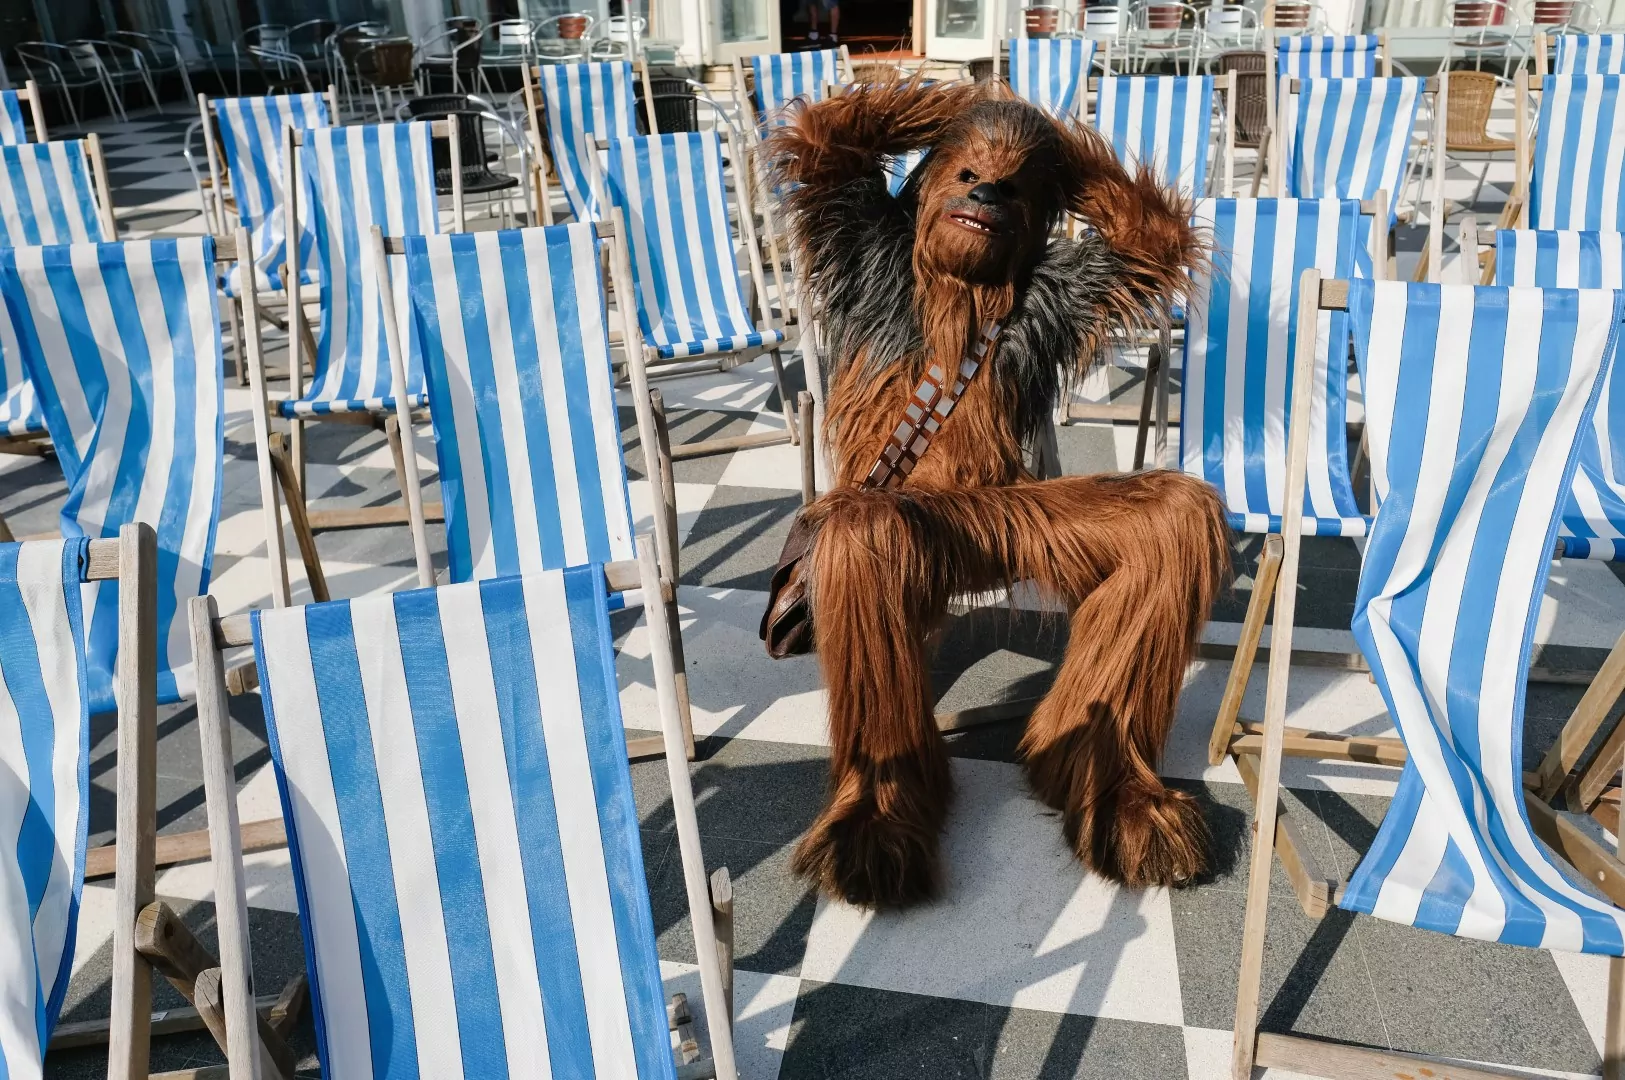 SCARBOROUGH, ENGLAND - APRIL 21: Will Hyde from Darlington relaxes as Chewbacca as he attends the Scarborough Sci-Fi event held at the seafront Spa Complex on April 21, 2018 in Scarborough, England. The North Yorkshire seaside town hosted the event for the fifth year and saw many areas of Sci-Fi fandom provided to entertain visitors including guest star appearances, gaming, cosplay, props, comic books and other merchandise stalls with many of those attending wearing costumes and outfits of their favourite Sci-Fi characters. (Photo by Ian Forsyth/Getty Images)